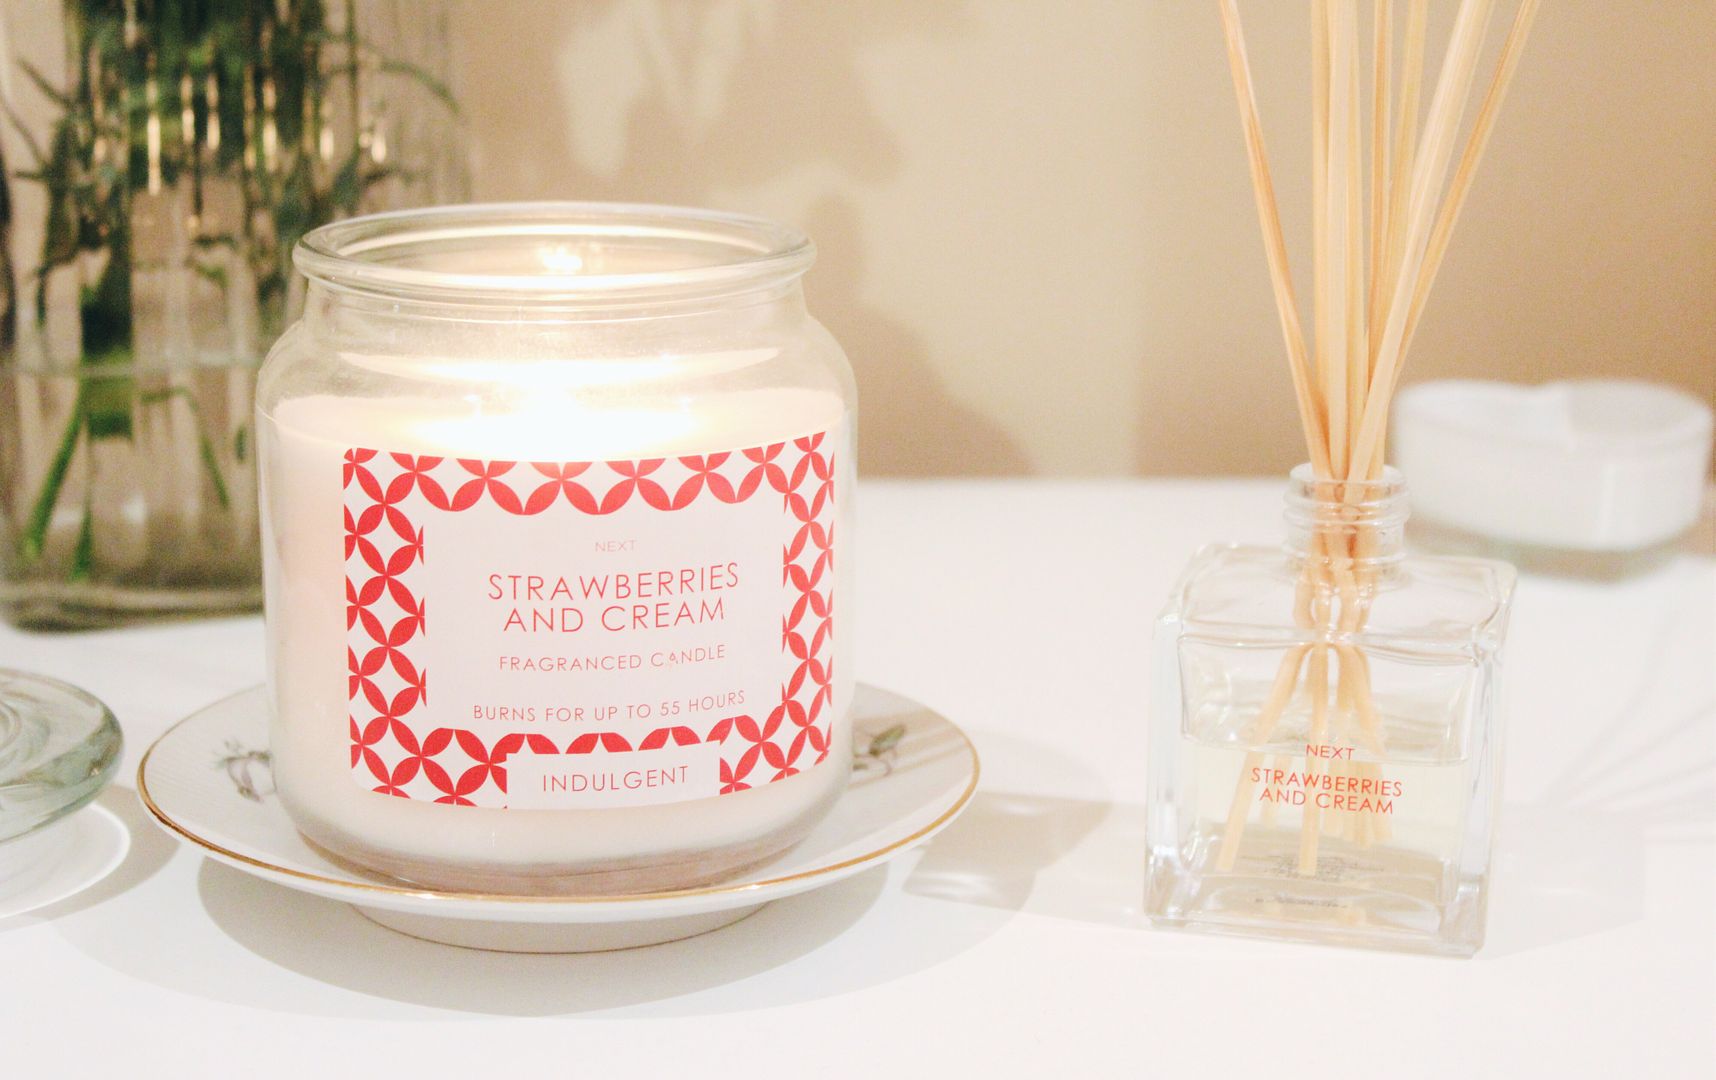 Next-Home-Strawberries-And-Cream-Room-Fragrance-Candle-Reed-Diffuser-Review-Photo-Belle-Amie-UK-Beauty-Fashion-Lifestyle-Blog